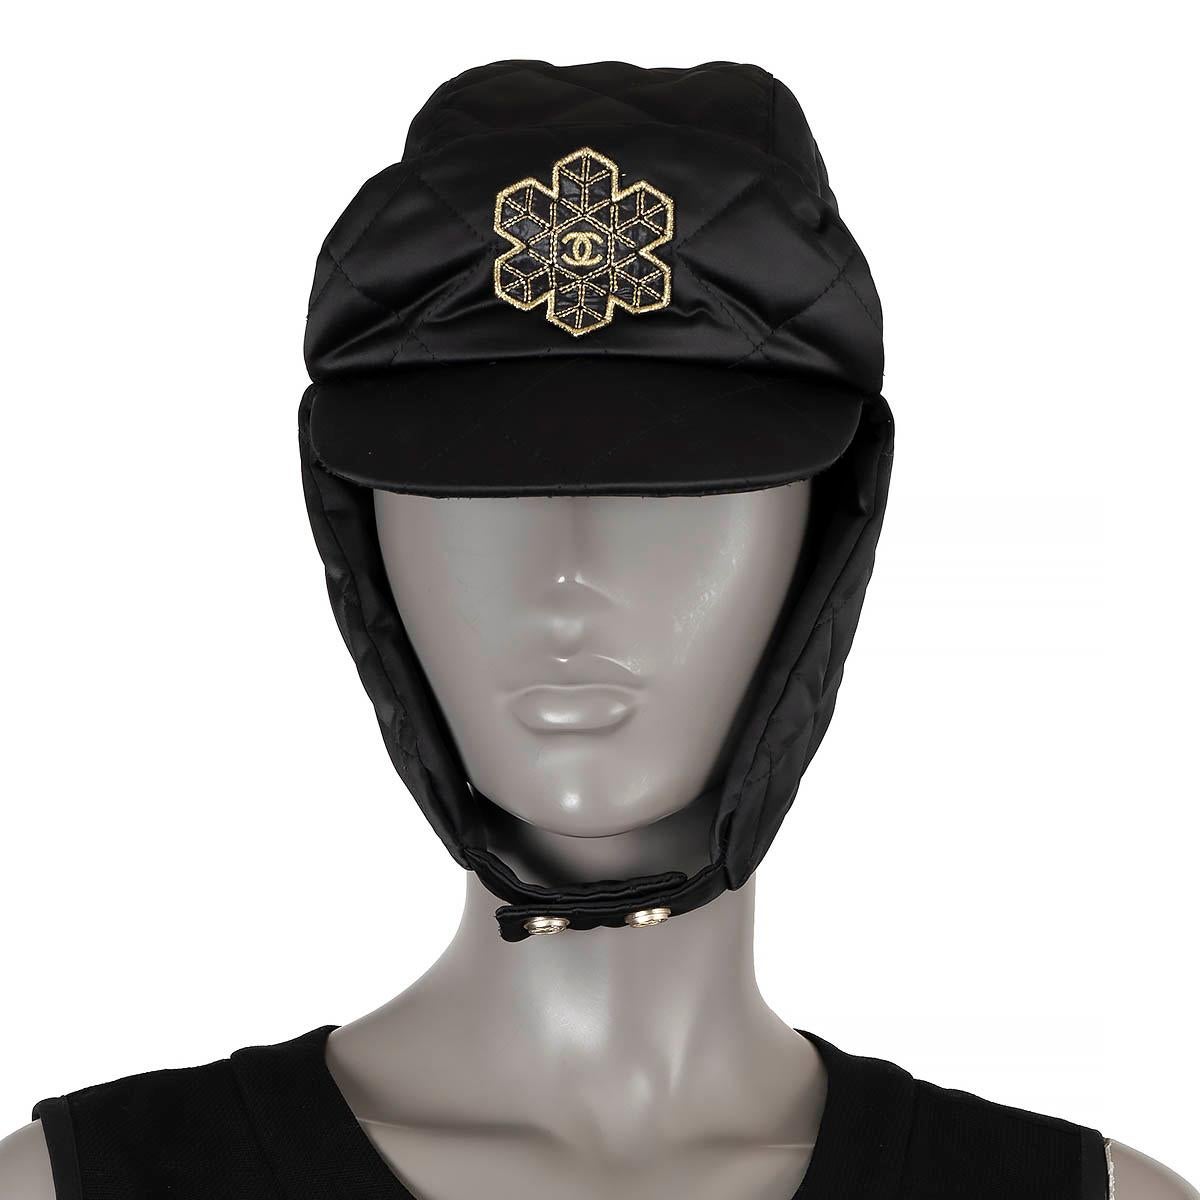 100% authentic Chanel trapper hat in black quilted and padded polyester (100%) embellished with golden snowflake CC patch. Lined in black cotton (100%). Has been worn and is in excellent condition. 

2019 Coco Neige

Measurements
Model	19N
Tag